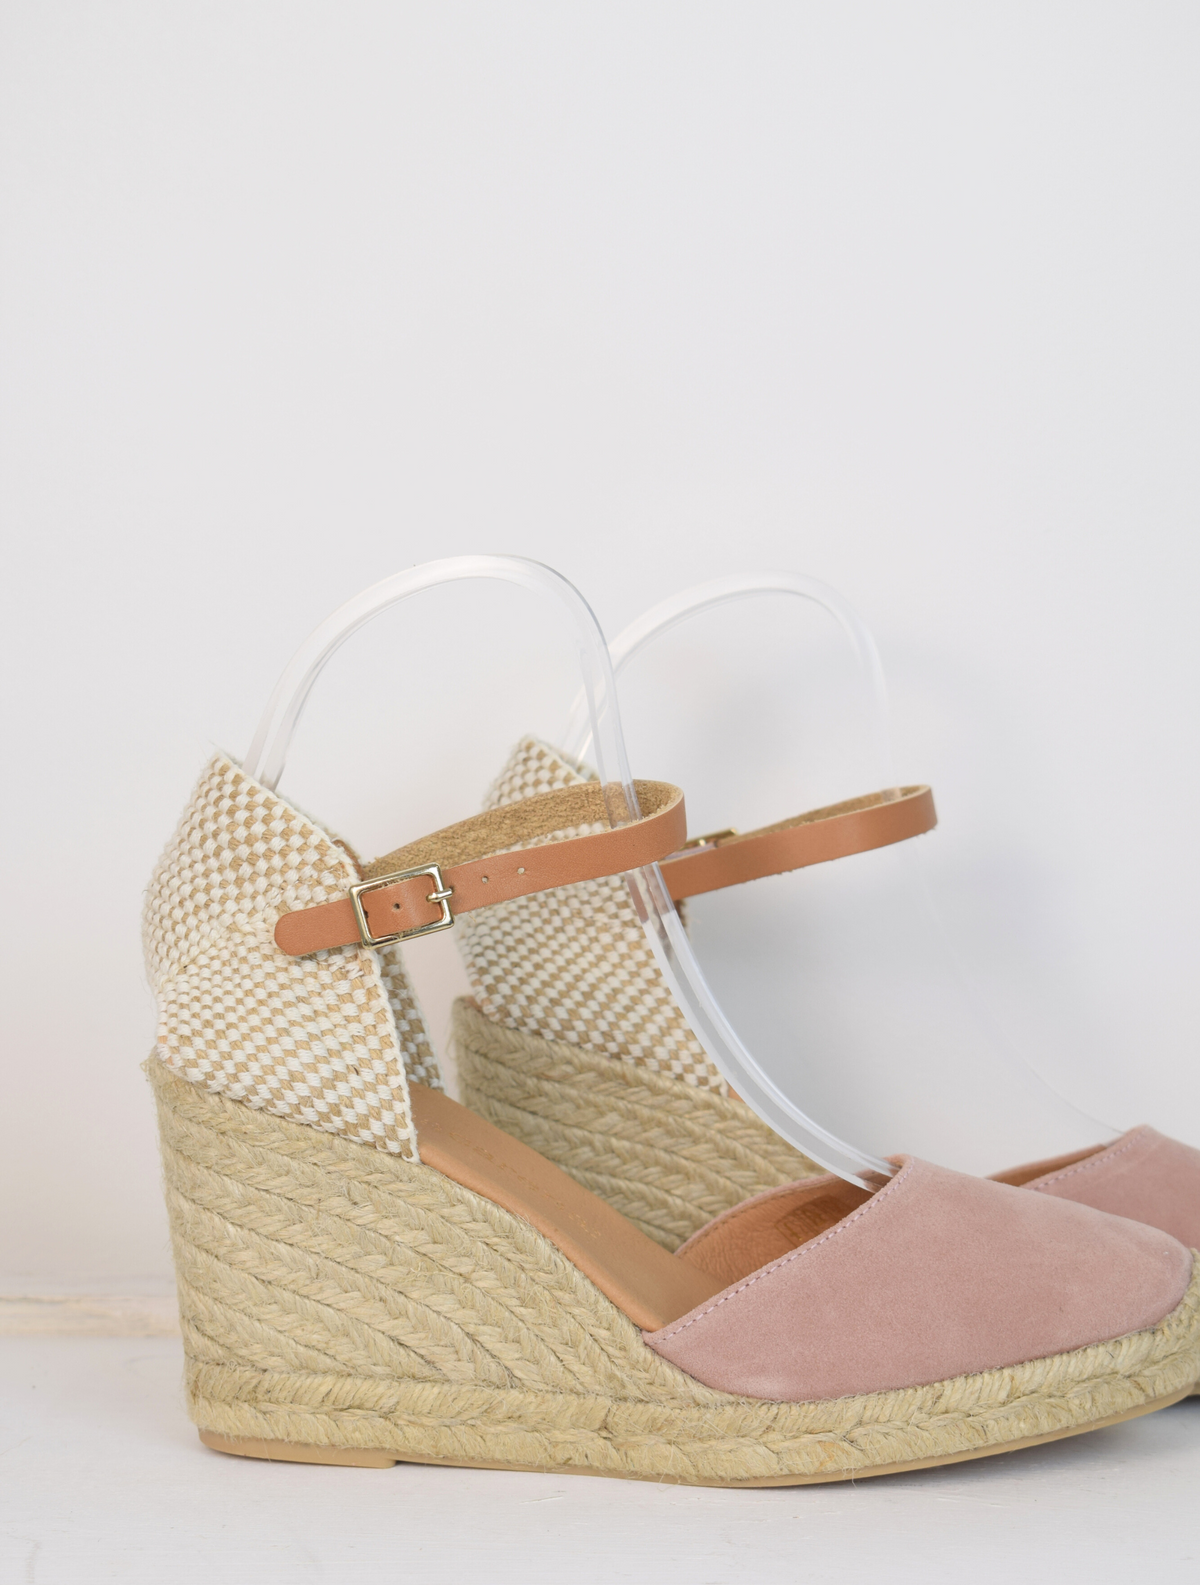  blush coloured wedge sandal with closed toe